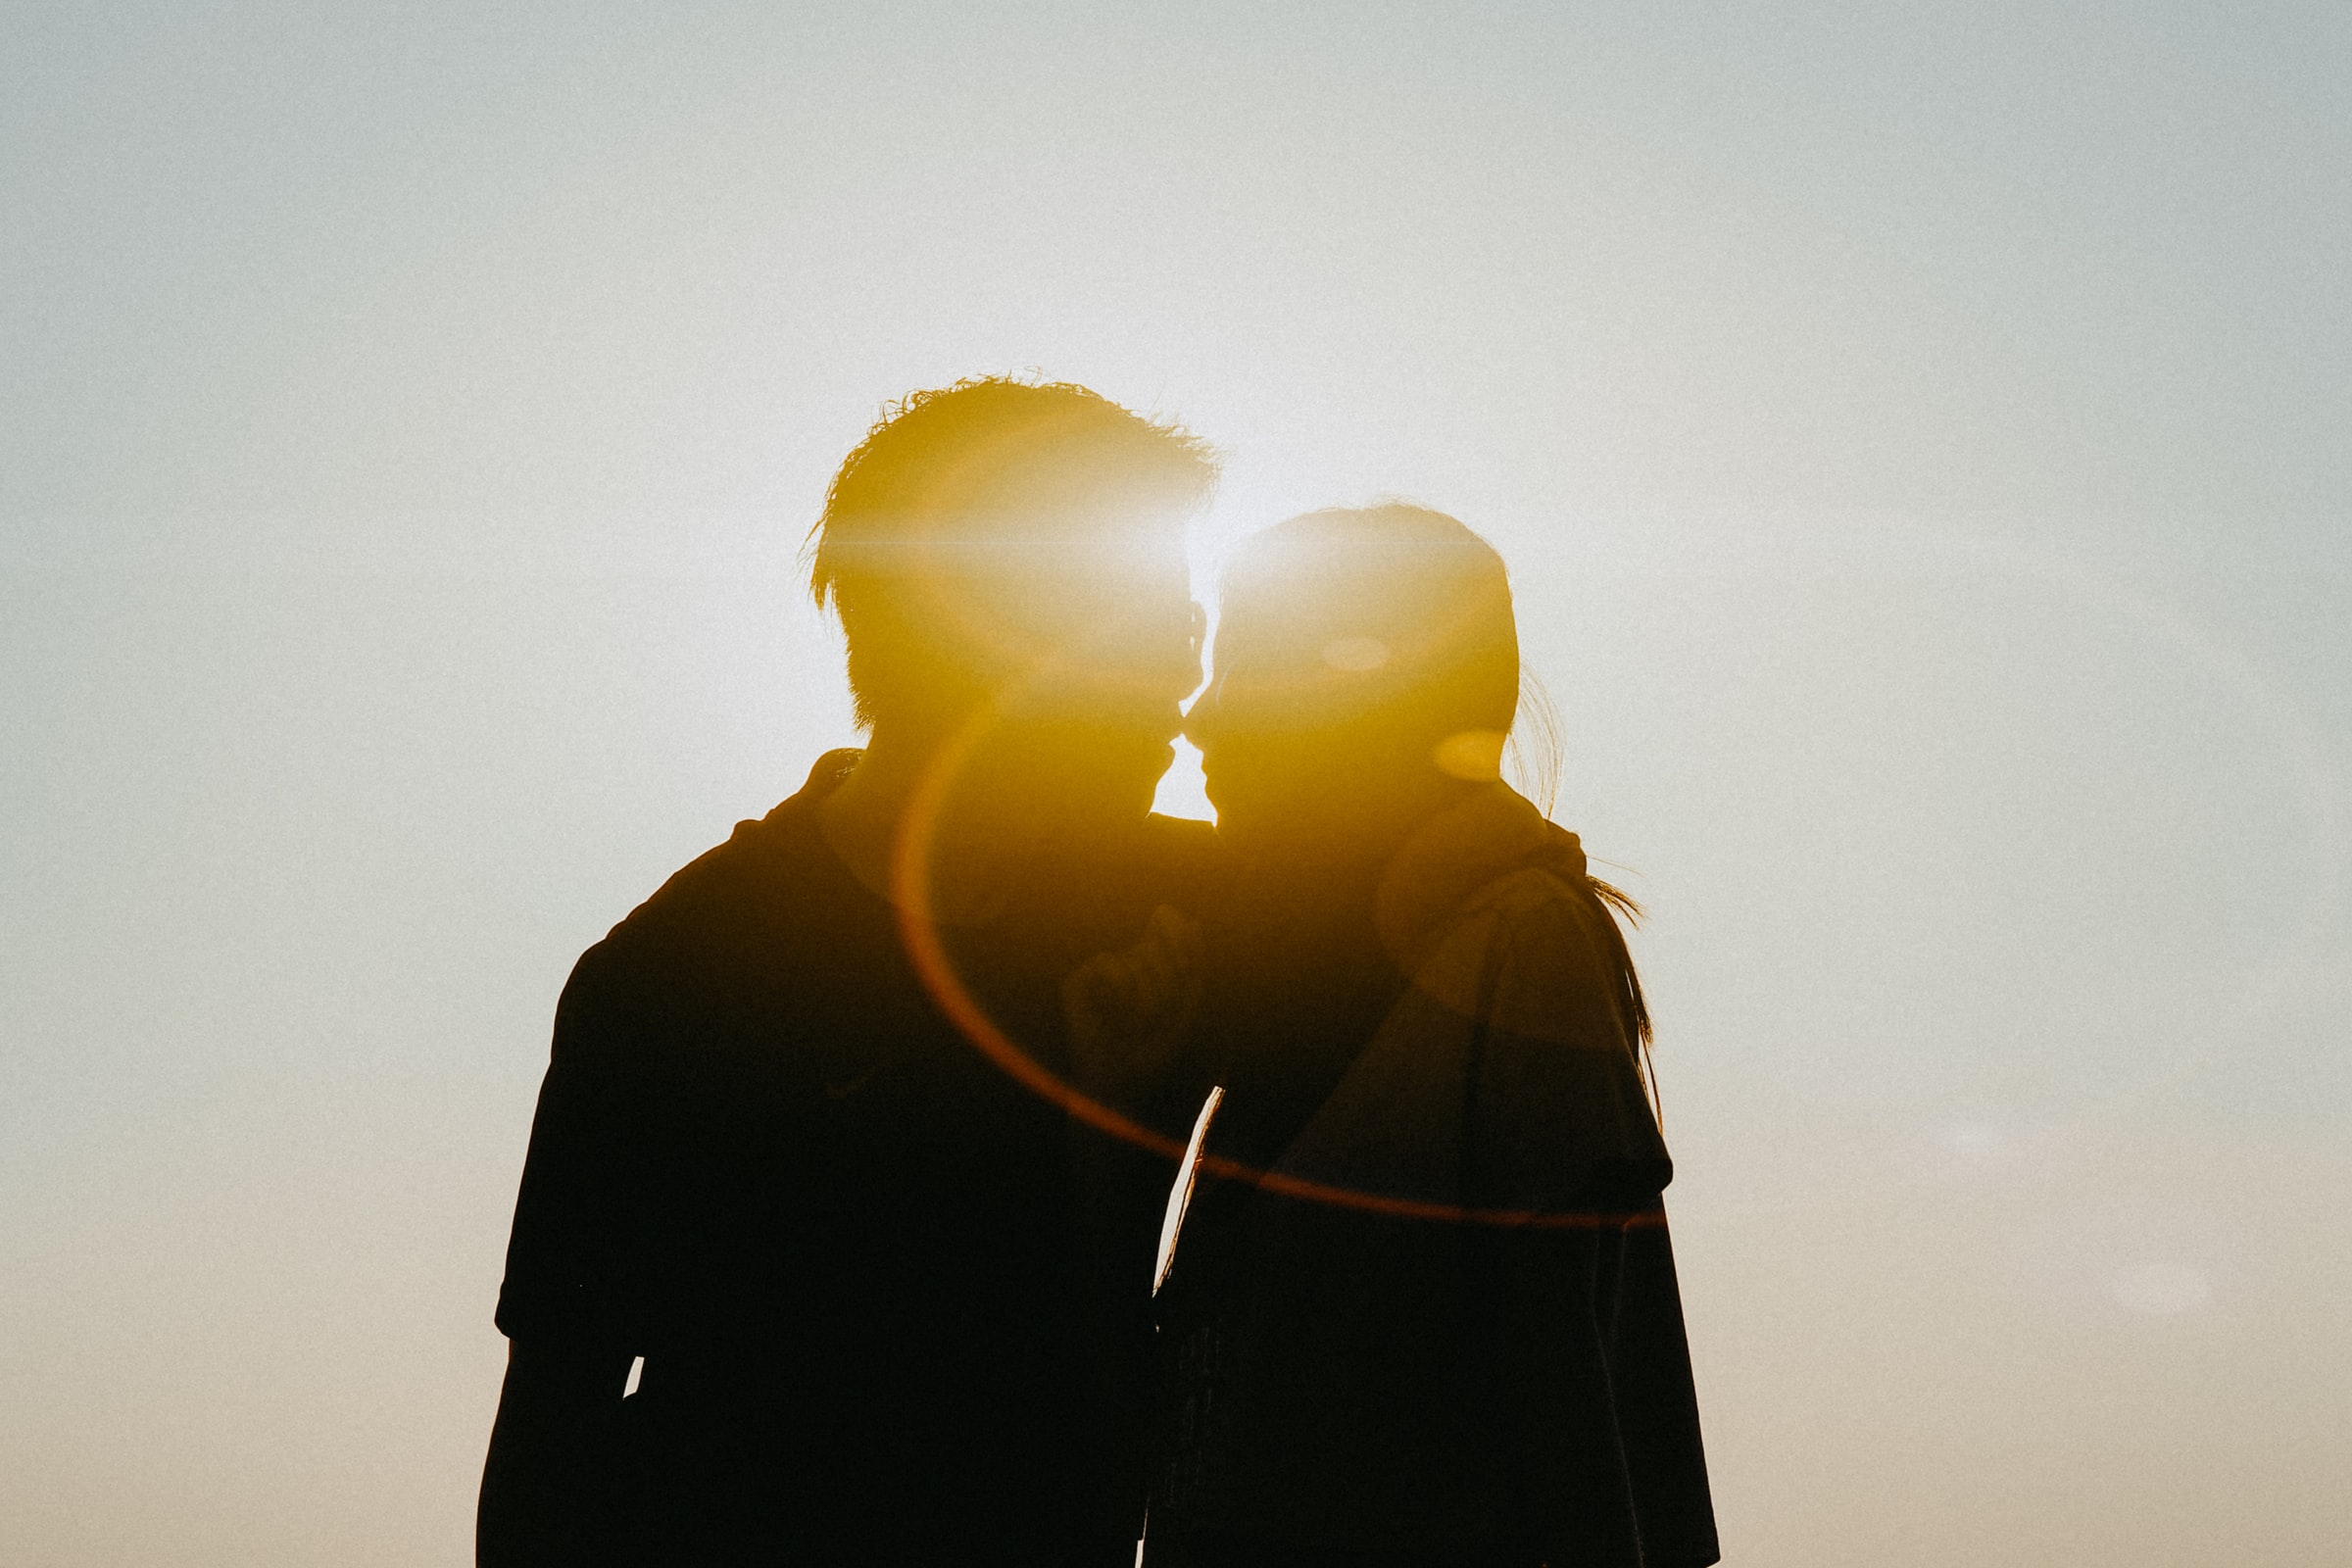 Check out our best tips to learn how to manage your finances as a couple! Source: Unsplash.